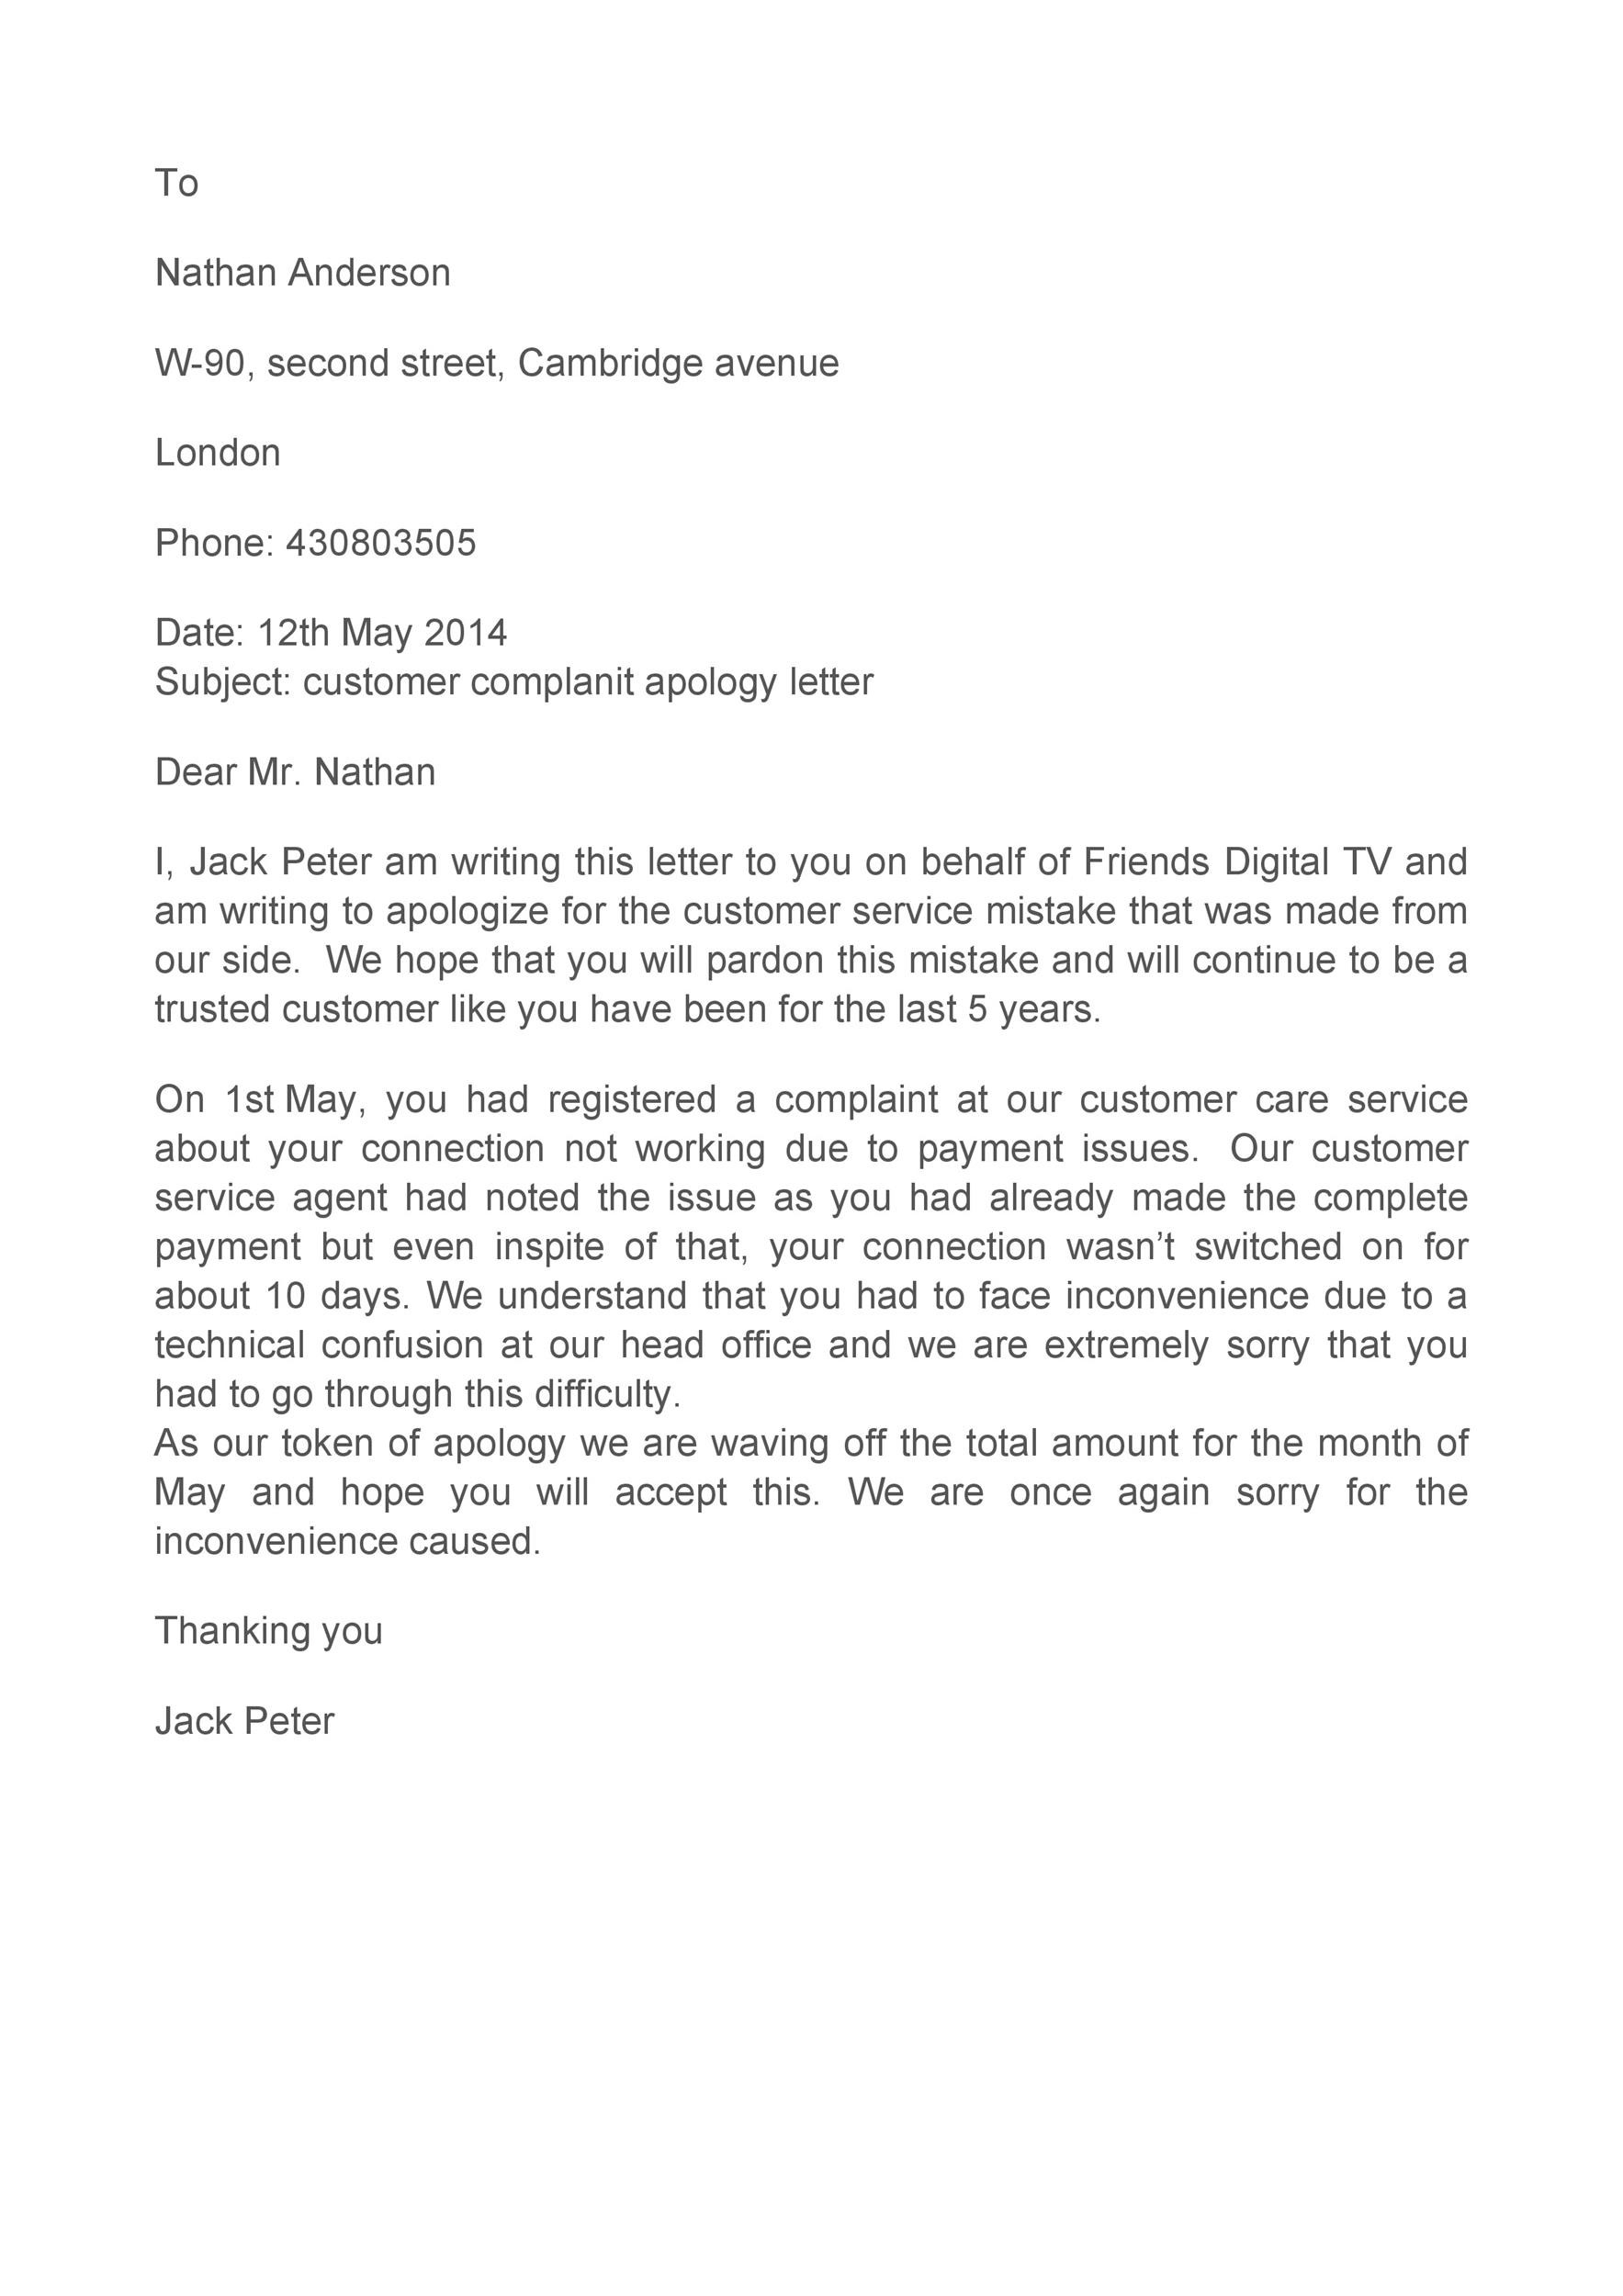 48 Useful Apology Letter Templates Sorry Letter Samples Letter for explanation of mistake made